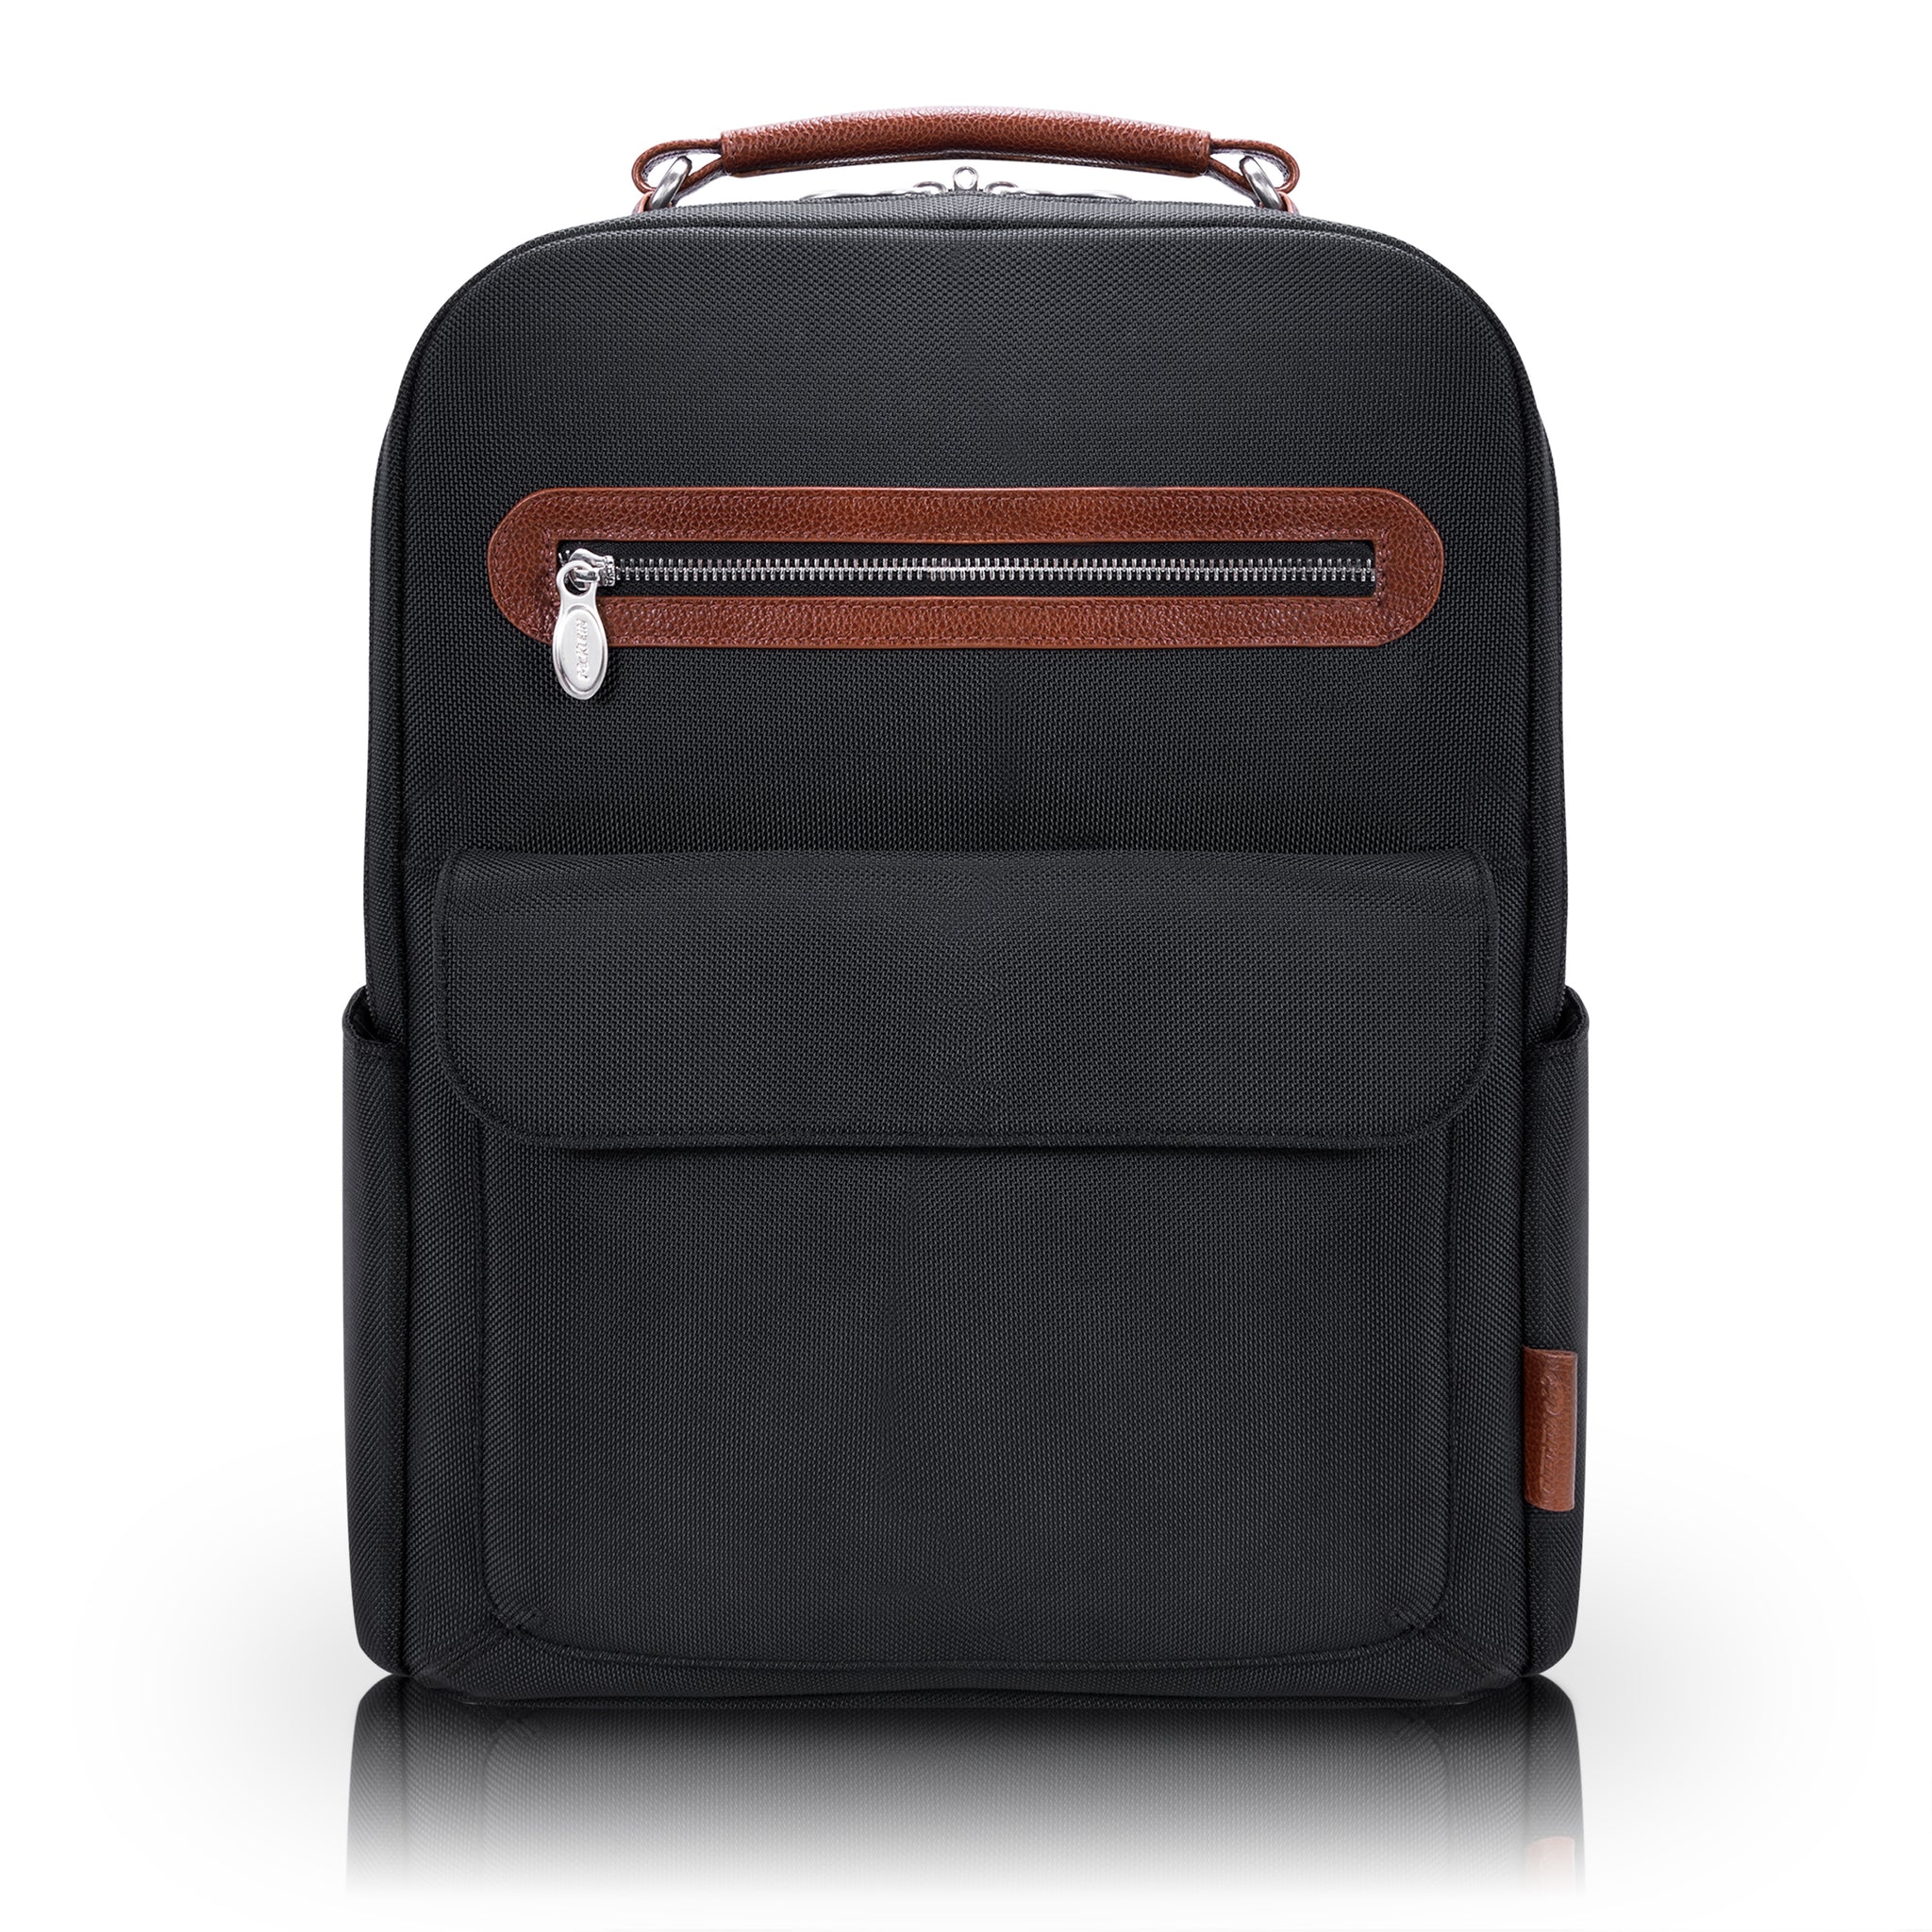 17" Two-Tone Laptop Backpack